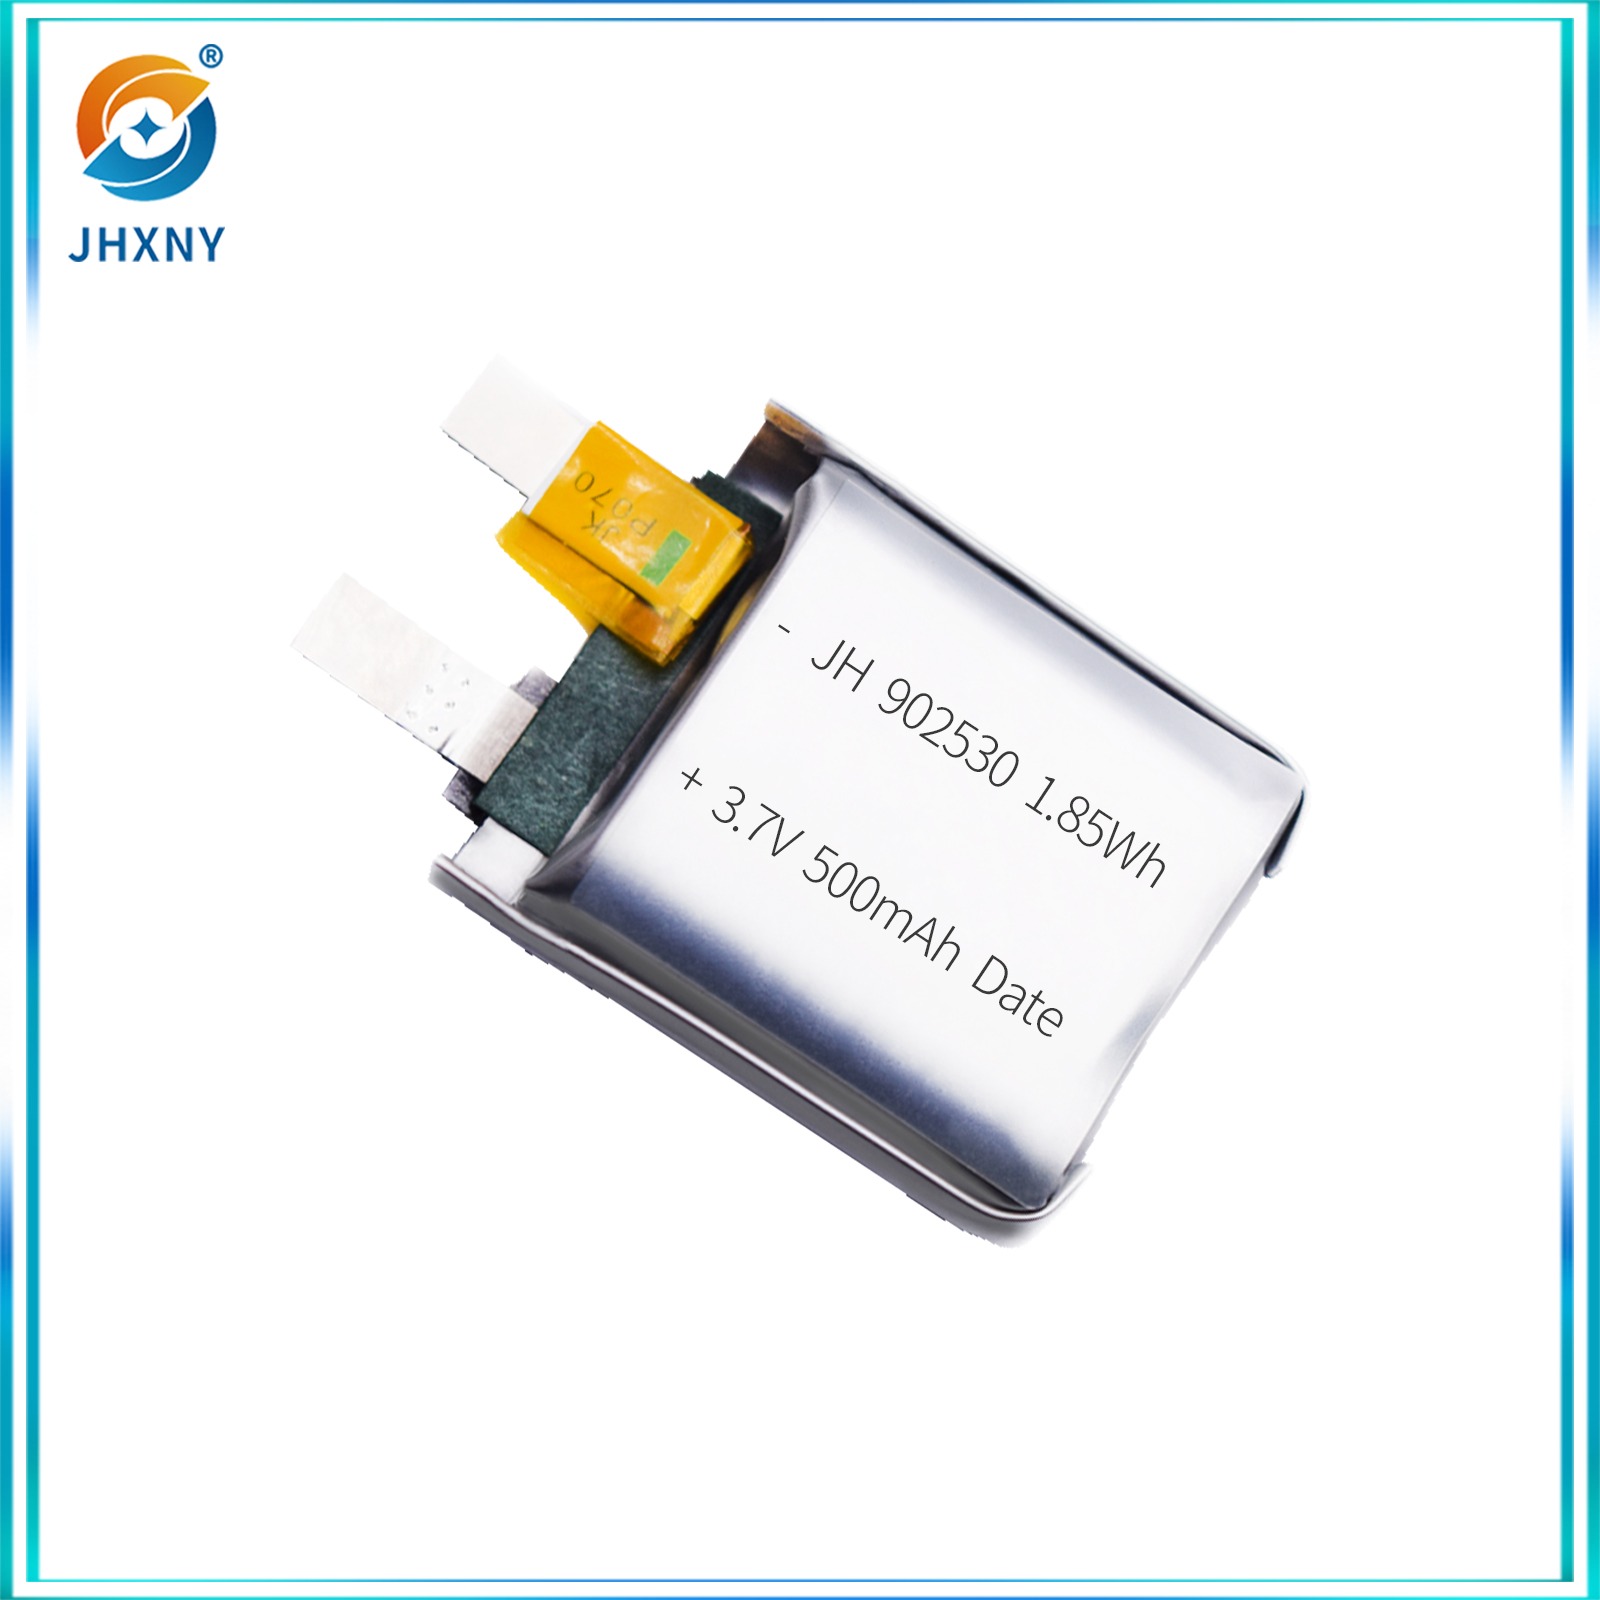 JH902530 3.7V500mAh polymer lithium battery washer dryer Electric screwdriver Shaver Hair clipper dog trainer Pedicure toy